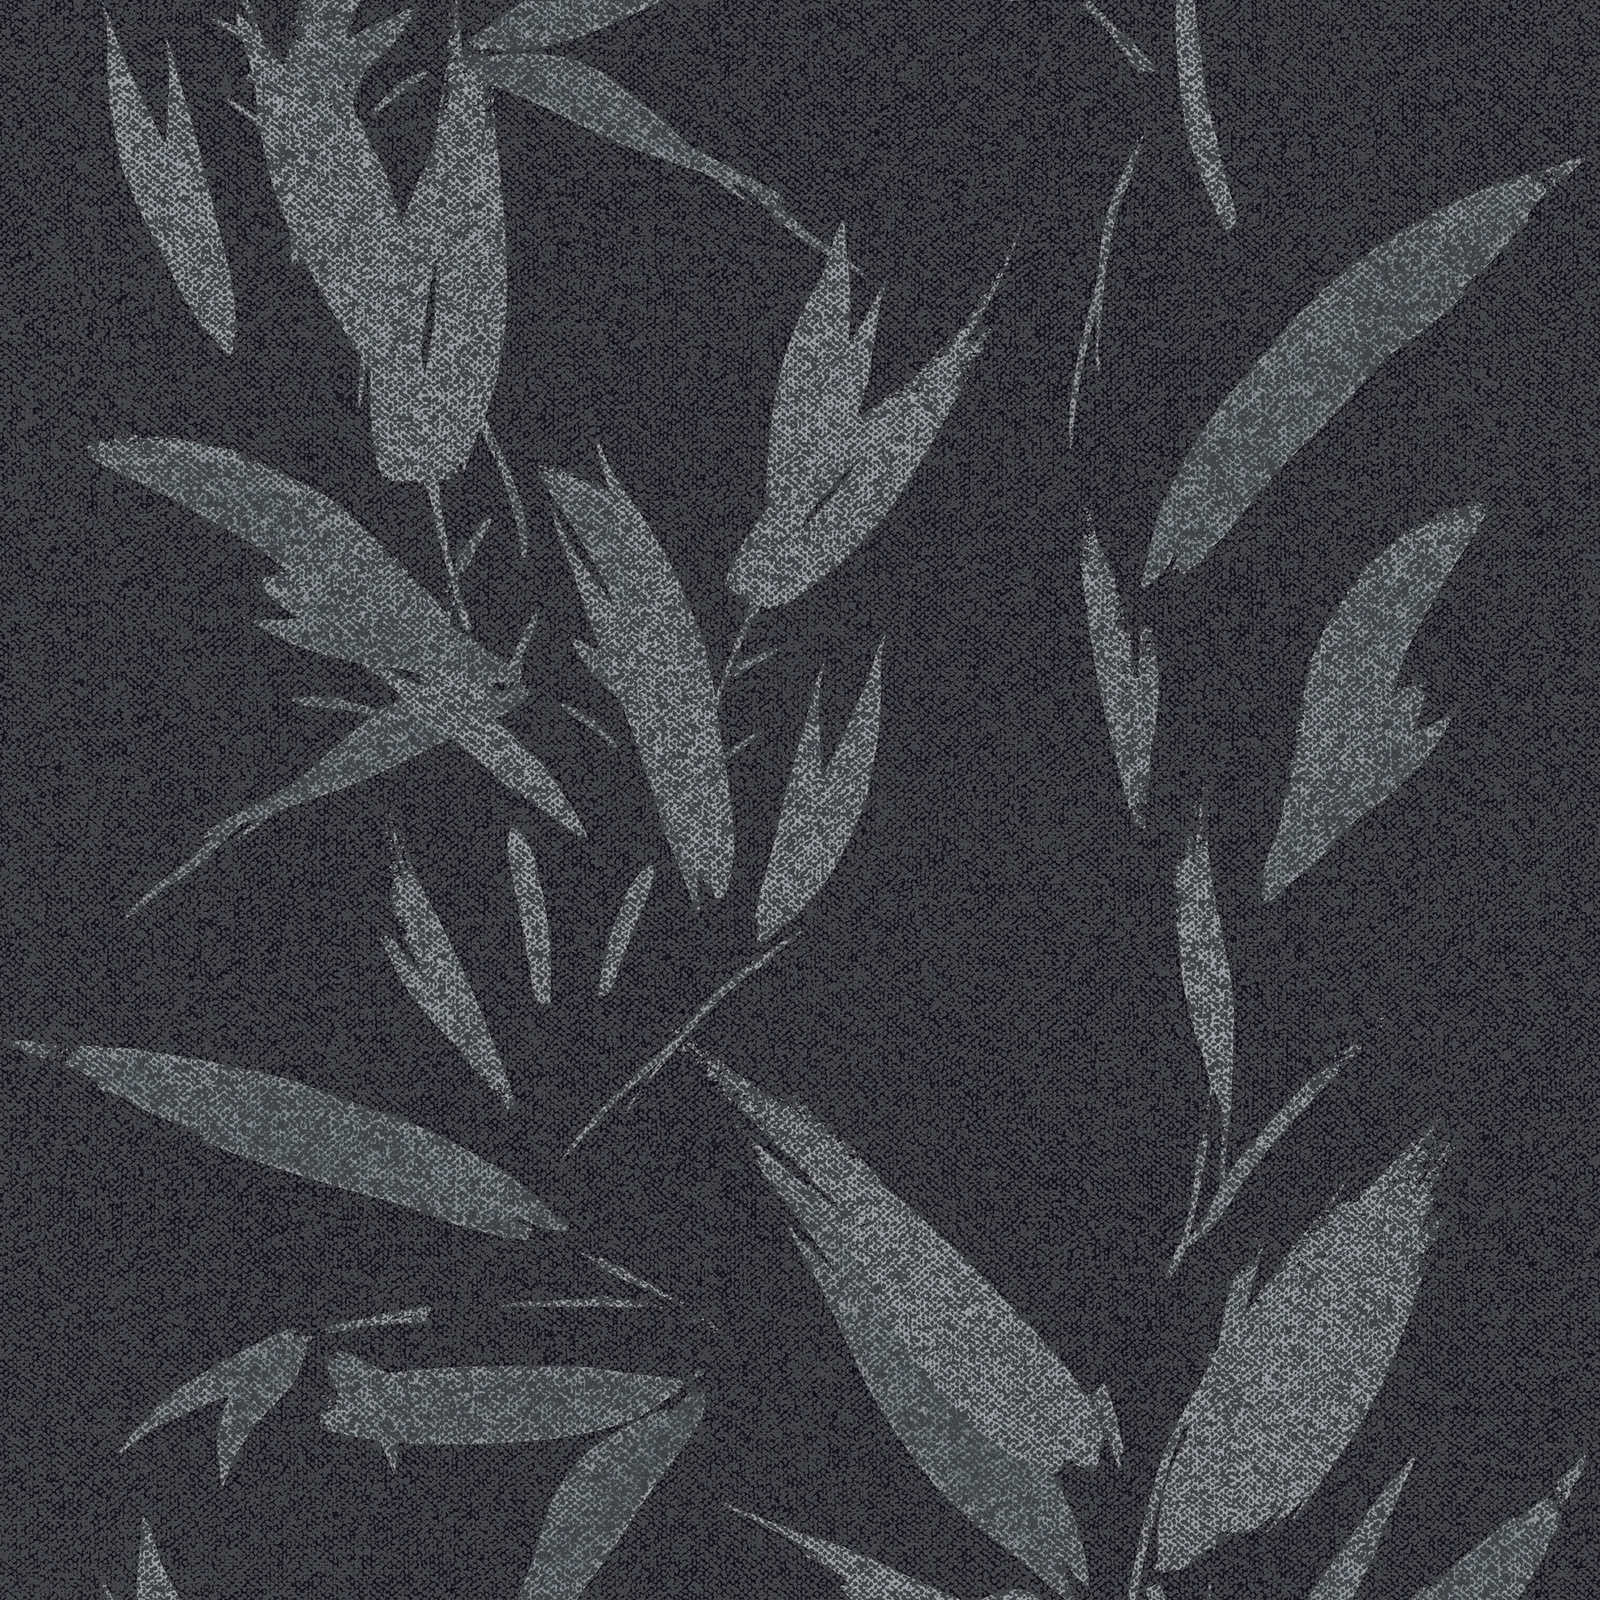 Leaves wallpaper abstract with textile look - black, grey
